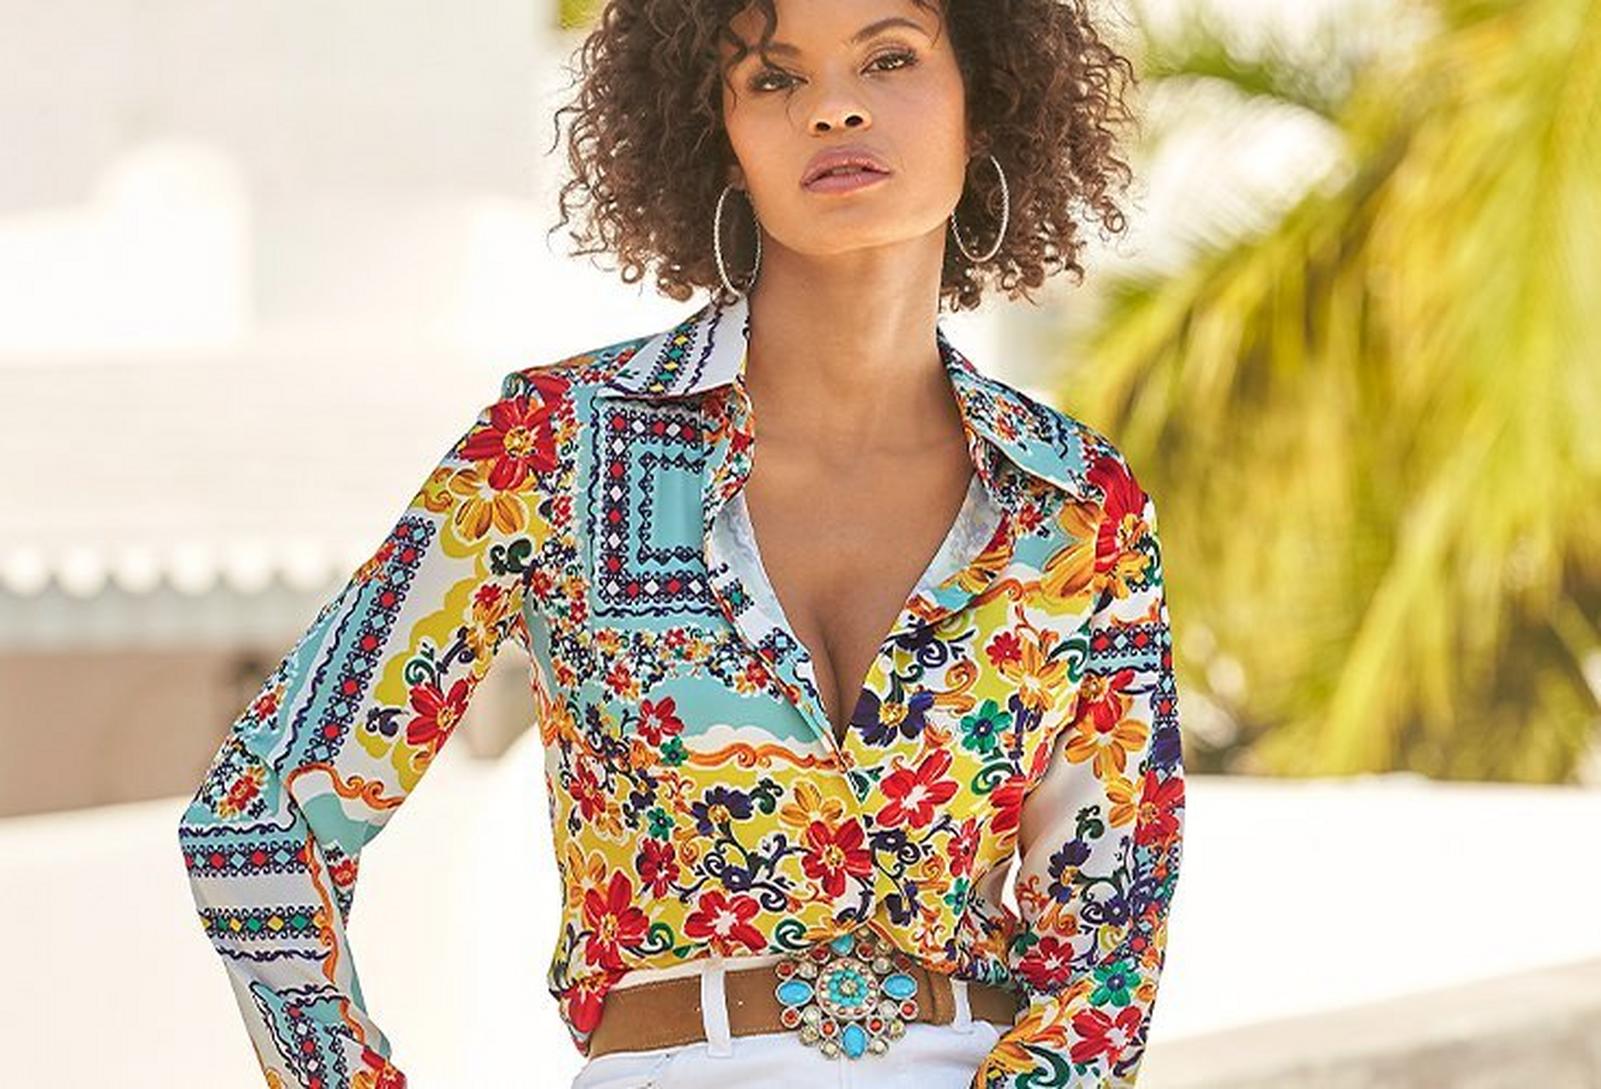 model wearing a scarf print multicolored long-sleeve button-up charmeuse blouse, stone embellished belt, and white jeans.